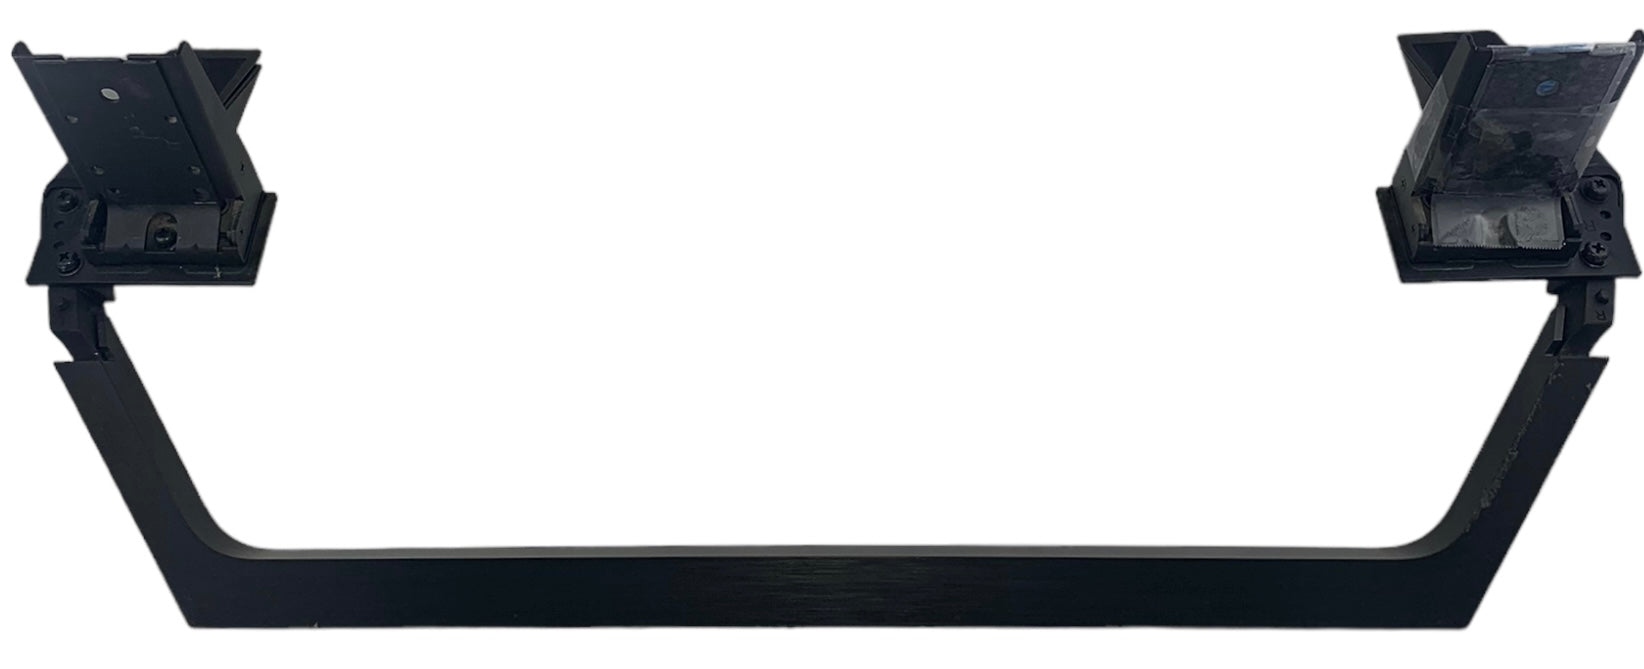 Sony KDL-55W650D TV Stand/Base